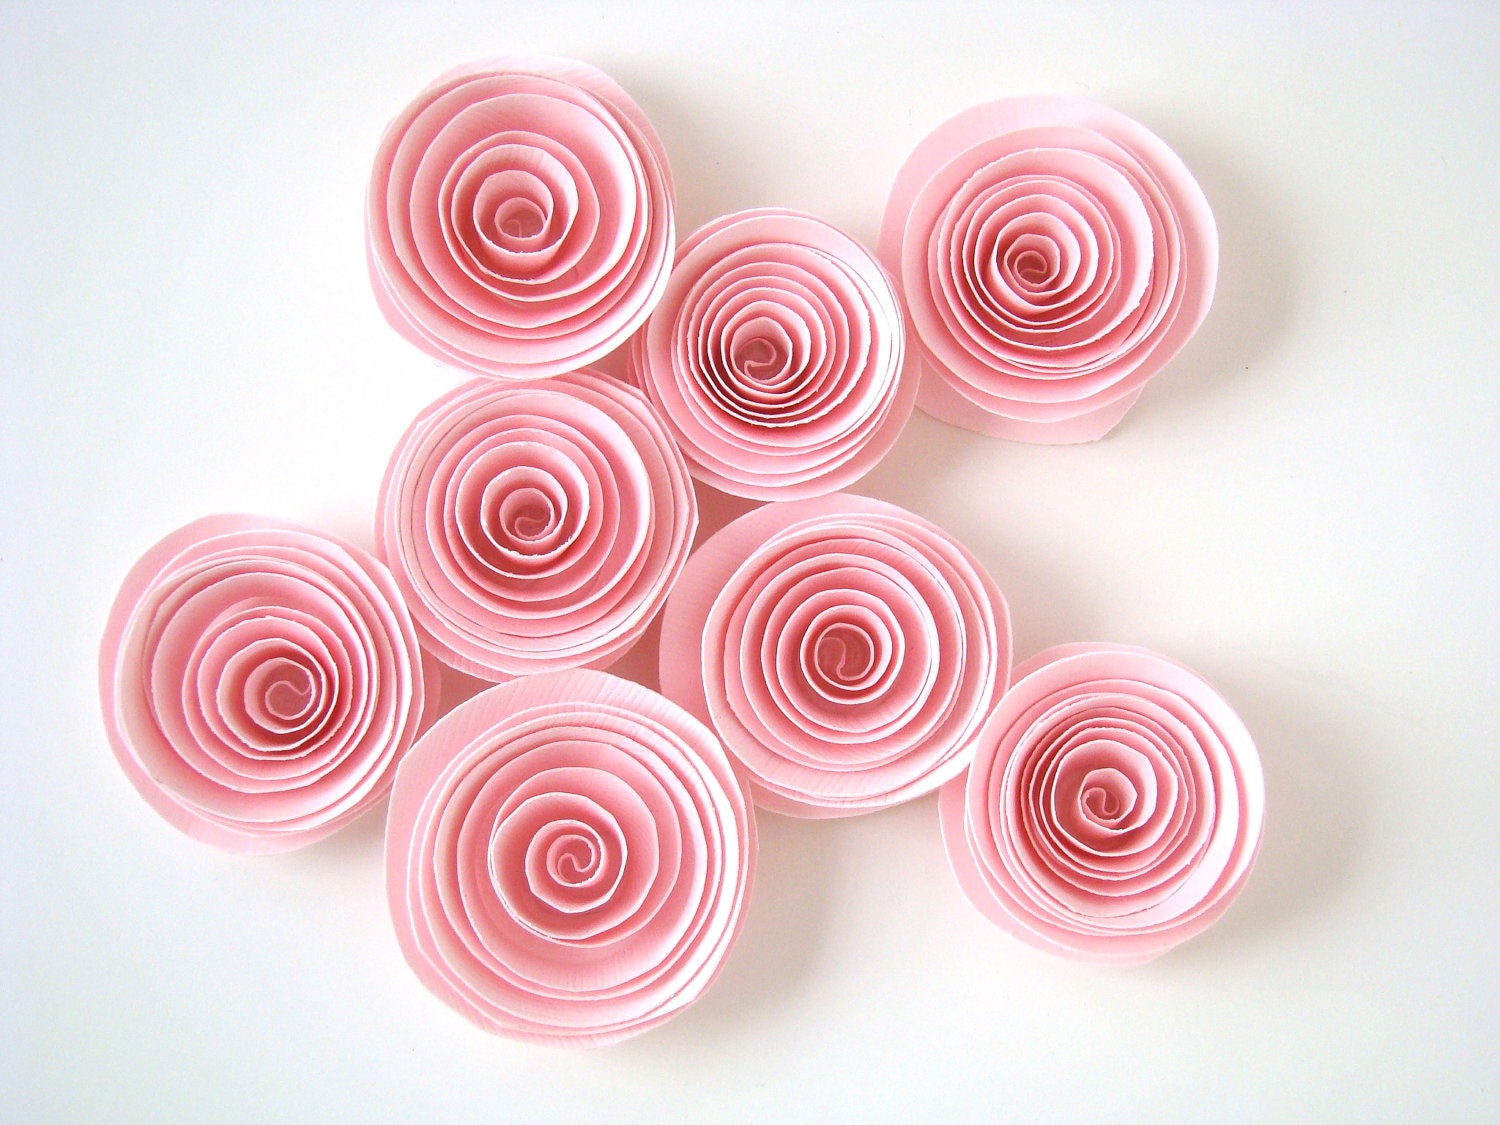 Spiral Paper Roses - Set of 10 in Pink Solids - OrigamiDelights